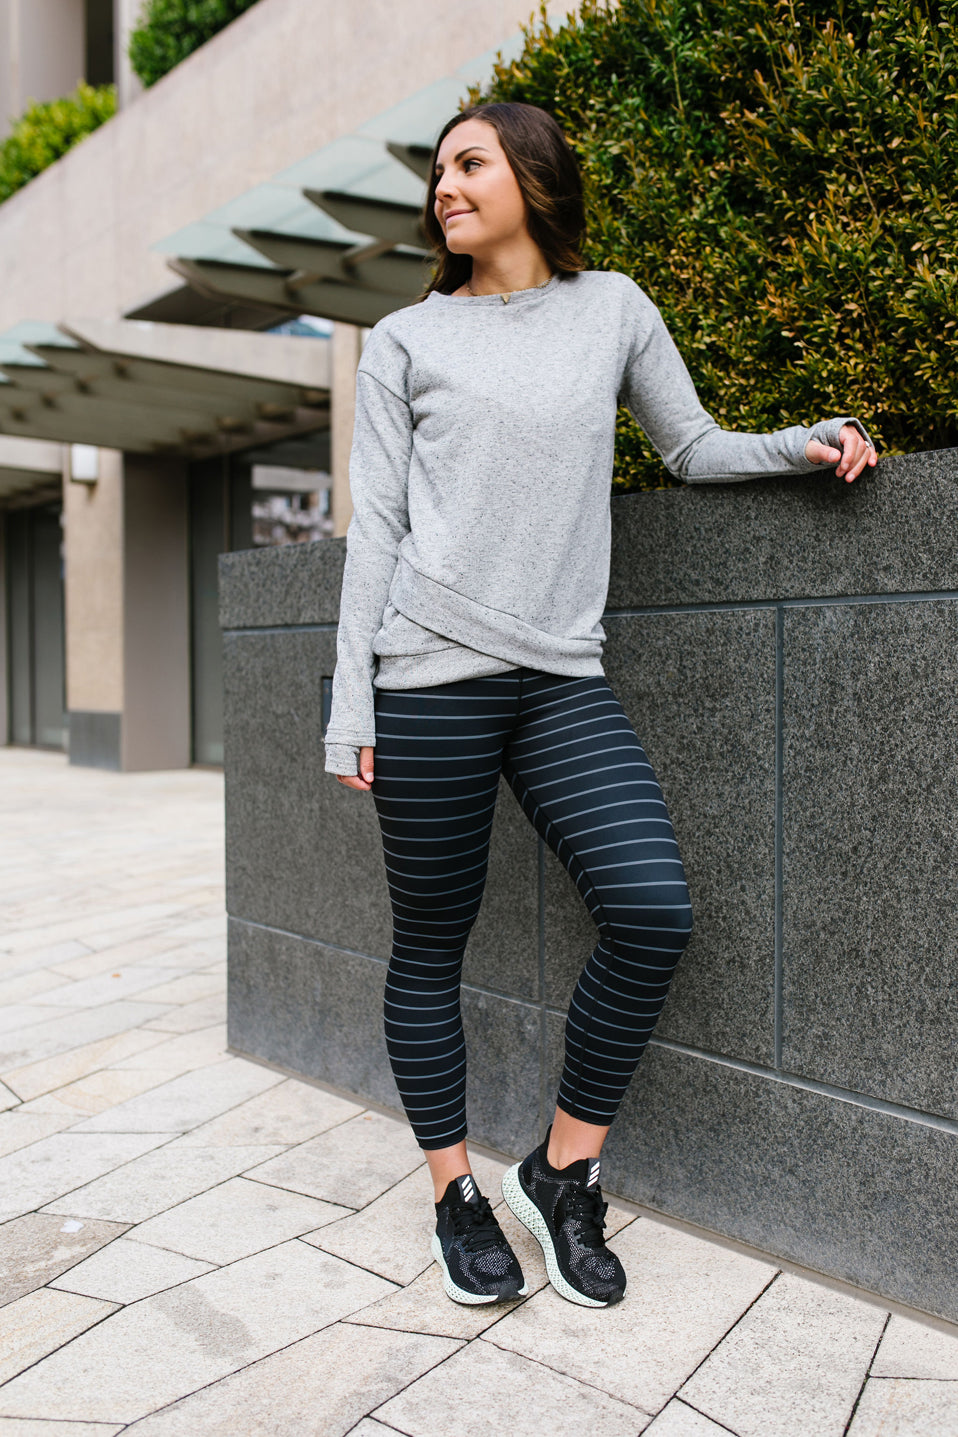 15 Stylish Ways to Wear Leggings This Fall - Cute Leggings Outfit Ideas